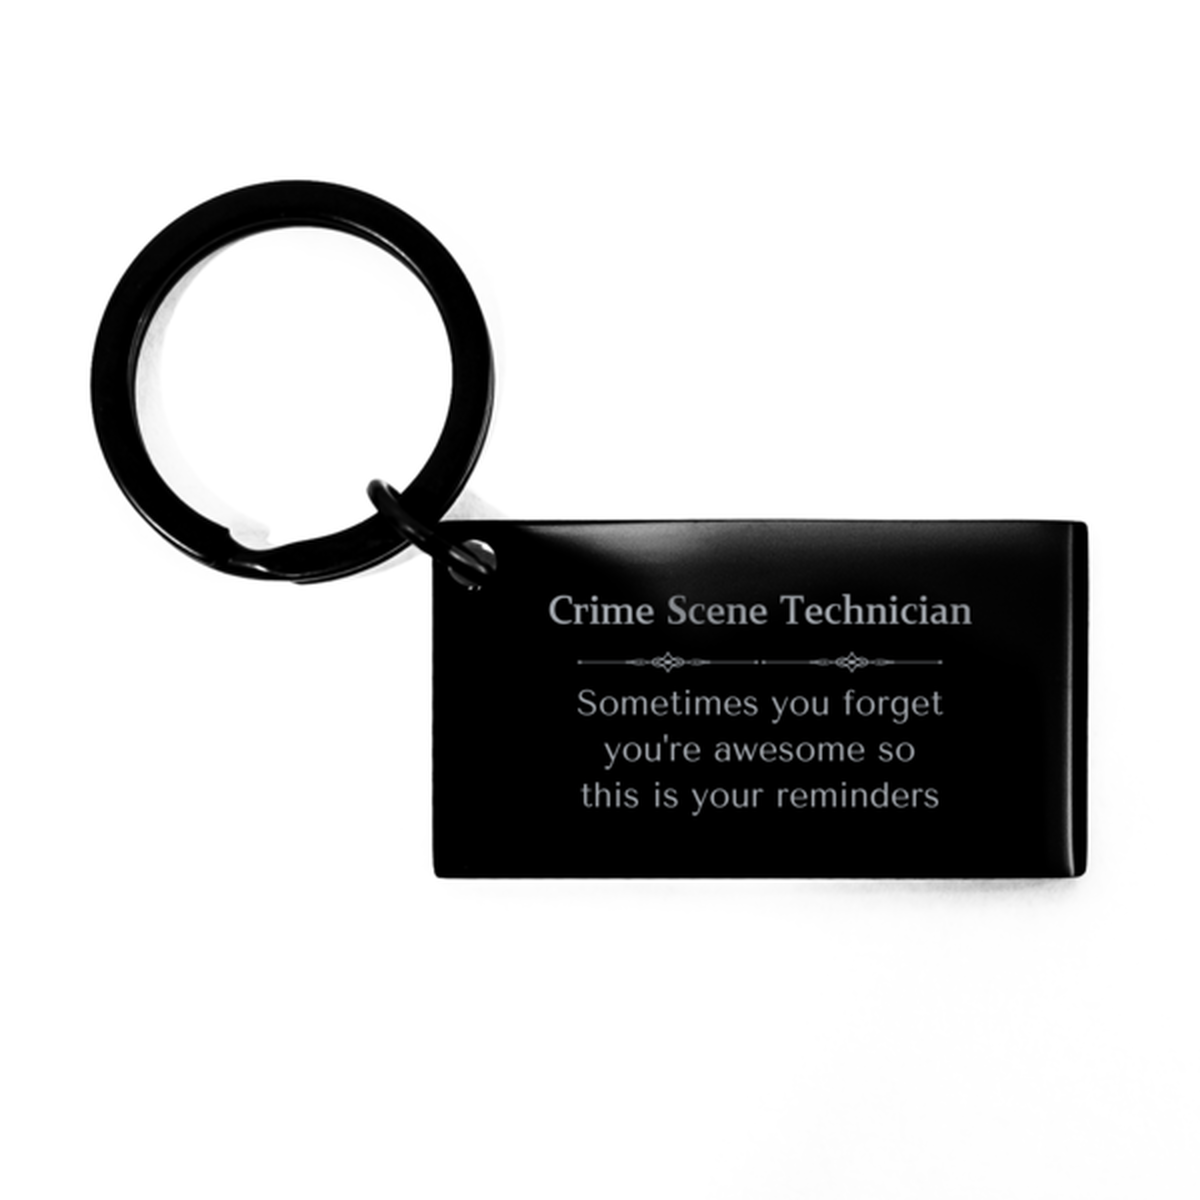 Sentimental Crime Scene Technician Keychain, Florist Sometimes you forget you're awesome so this is your reminders, Graduation Christmas Birthday Gifts for Crime Scene Technician, Men, Women, Coworkers